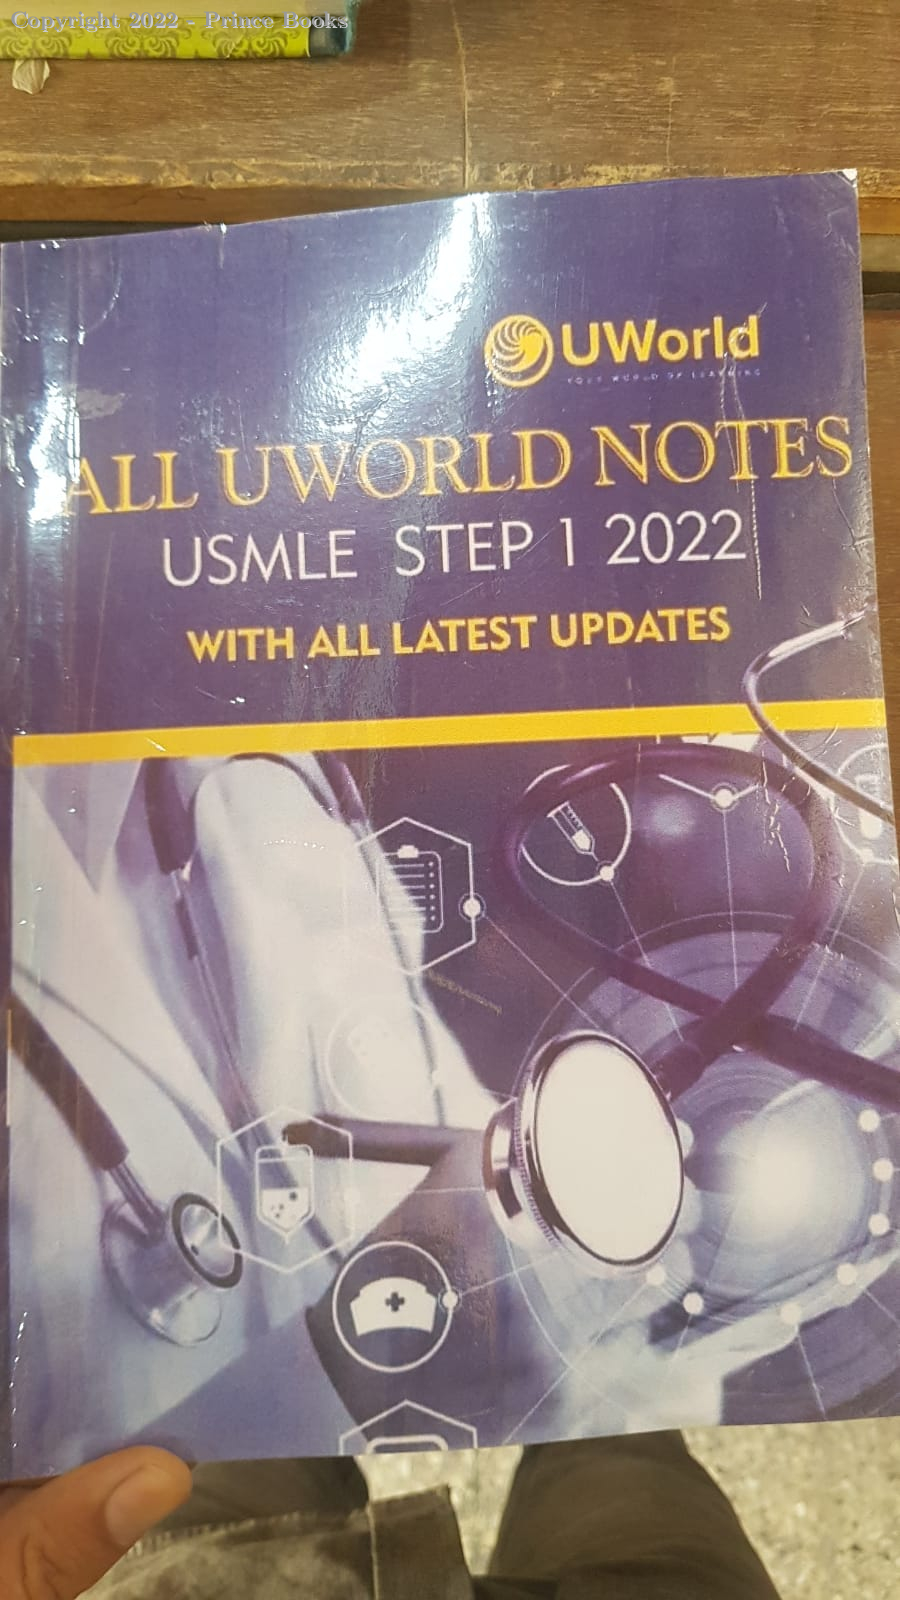 34316949-all-uworld-notes-usmle-step-1-2022-with-all-latest-updates